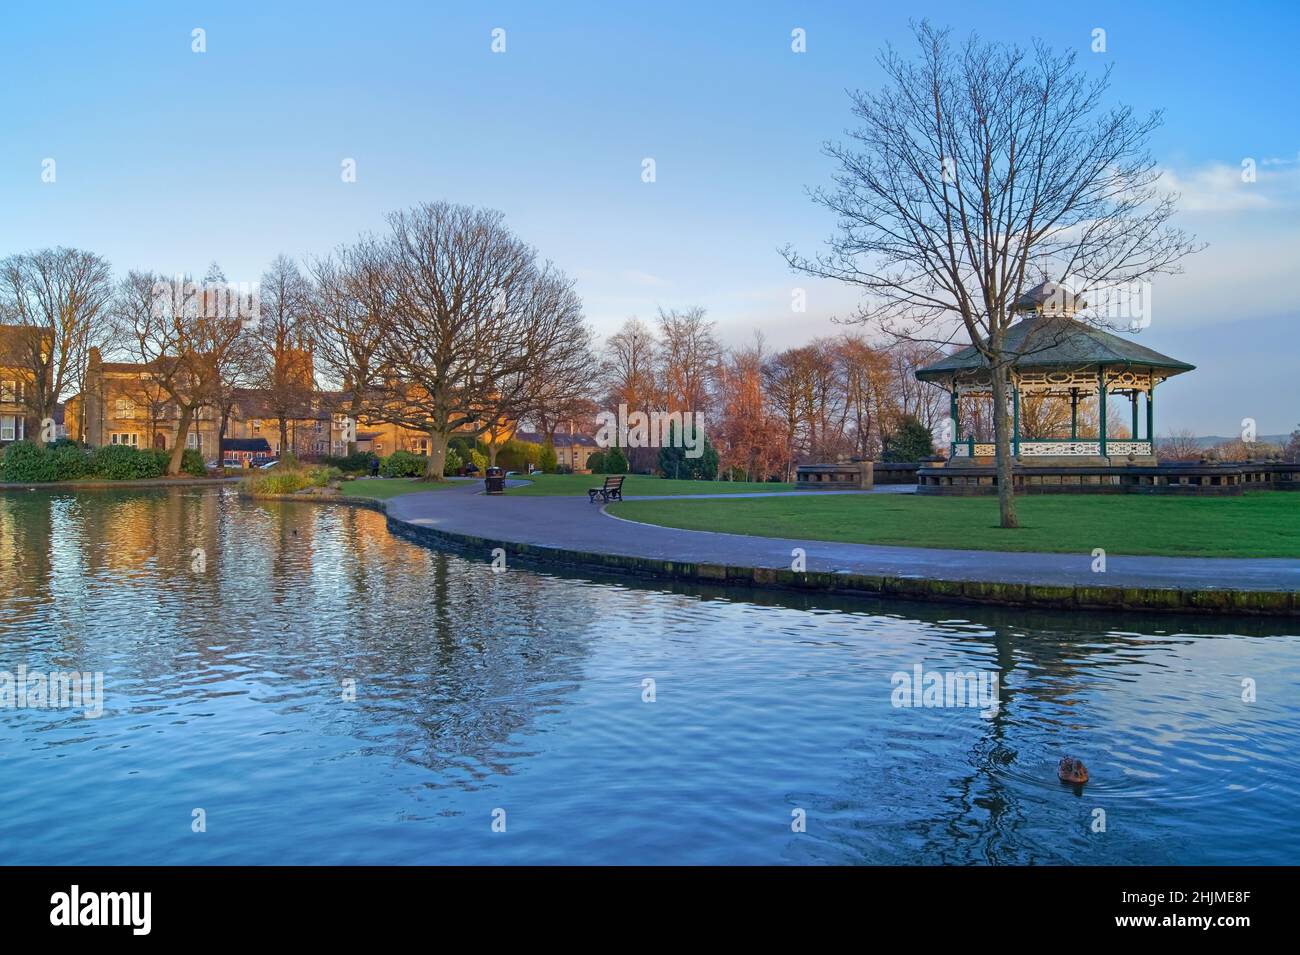 UK, West Yorkshire, Huddersfield, Greenhead Park, Bandstand and Lake Stock Photo